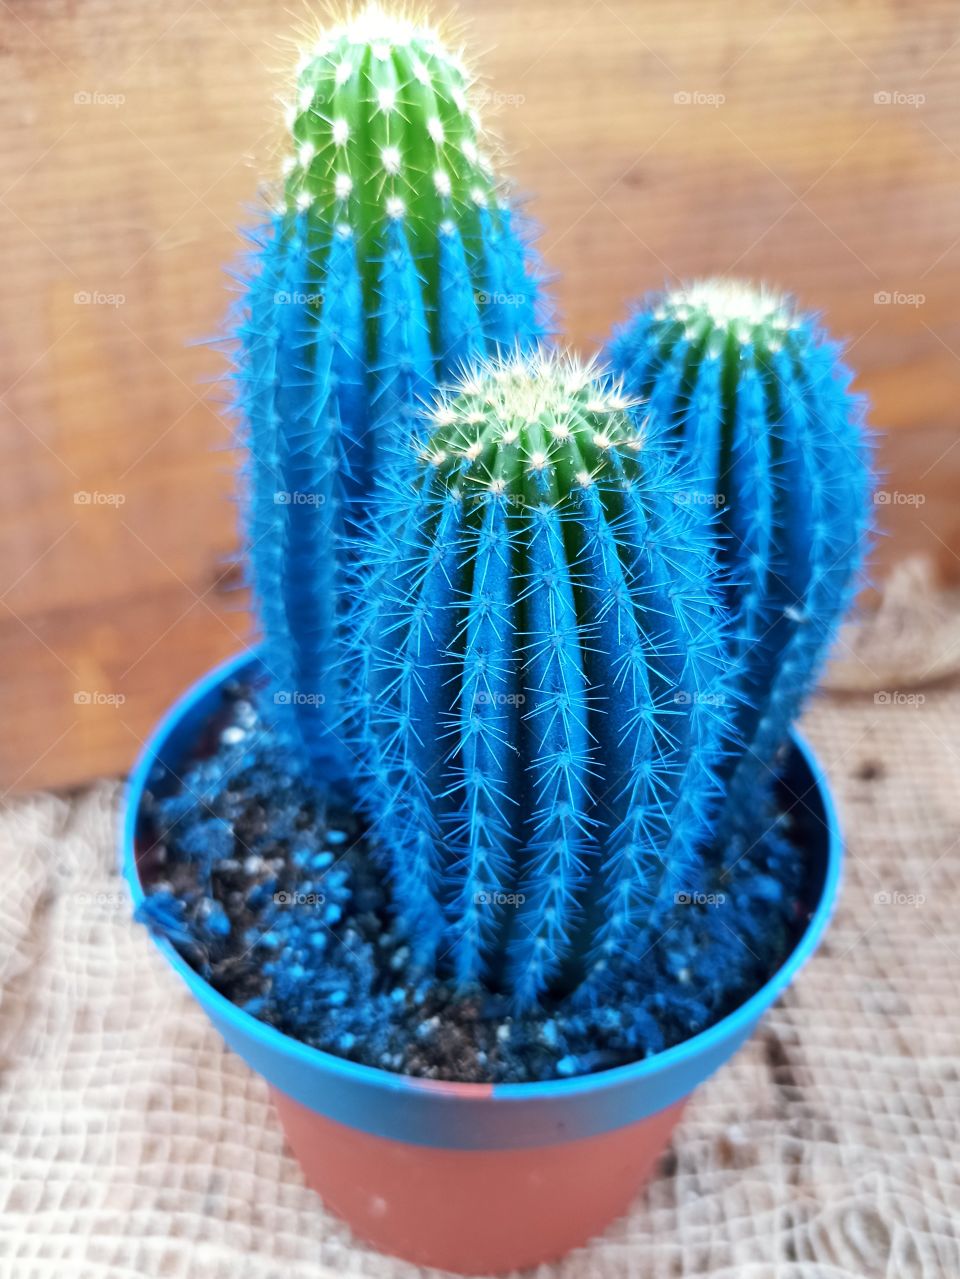 Cactus painted in blue in a pot, on a table with linen cloth